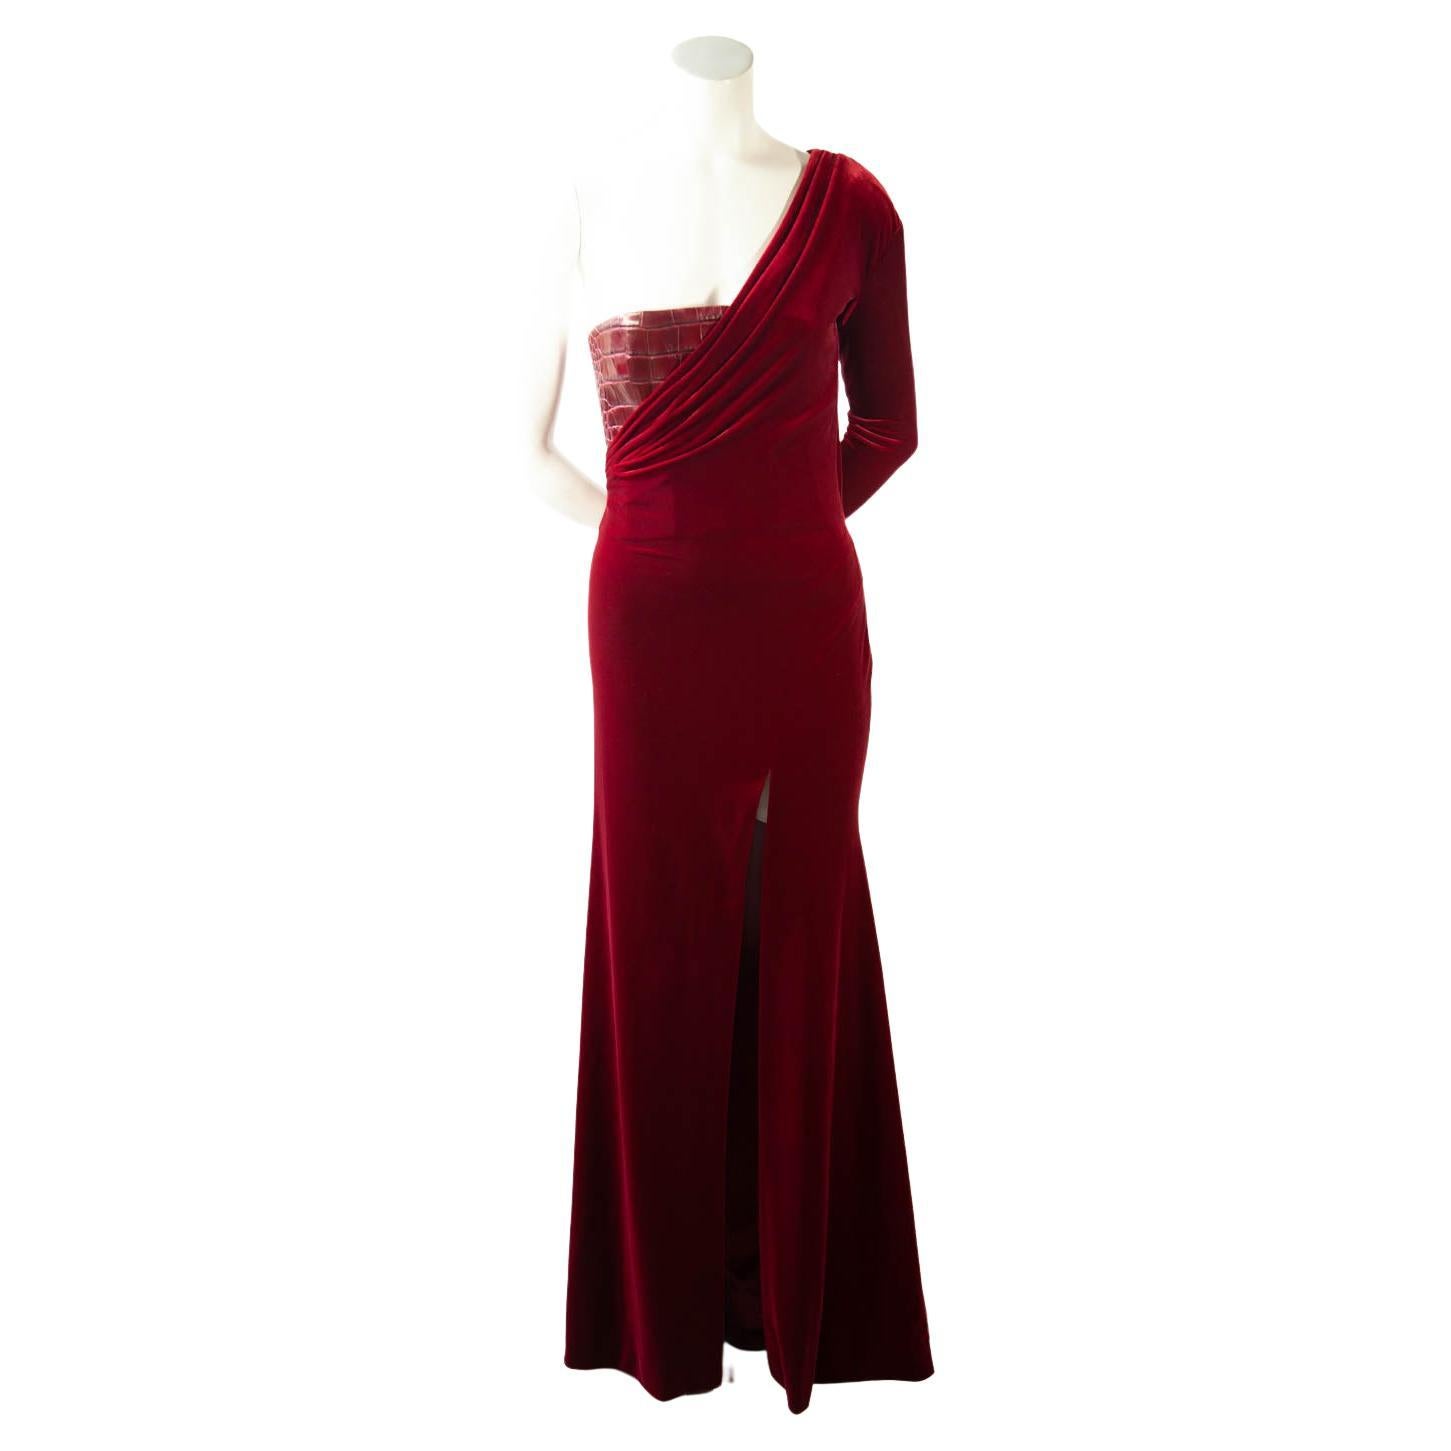 Givenchy Haute Couture, Velvet, Red, Gown, 2015 For Sale